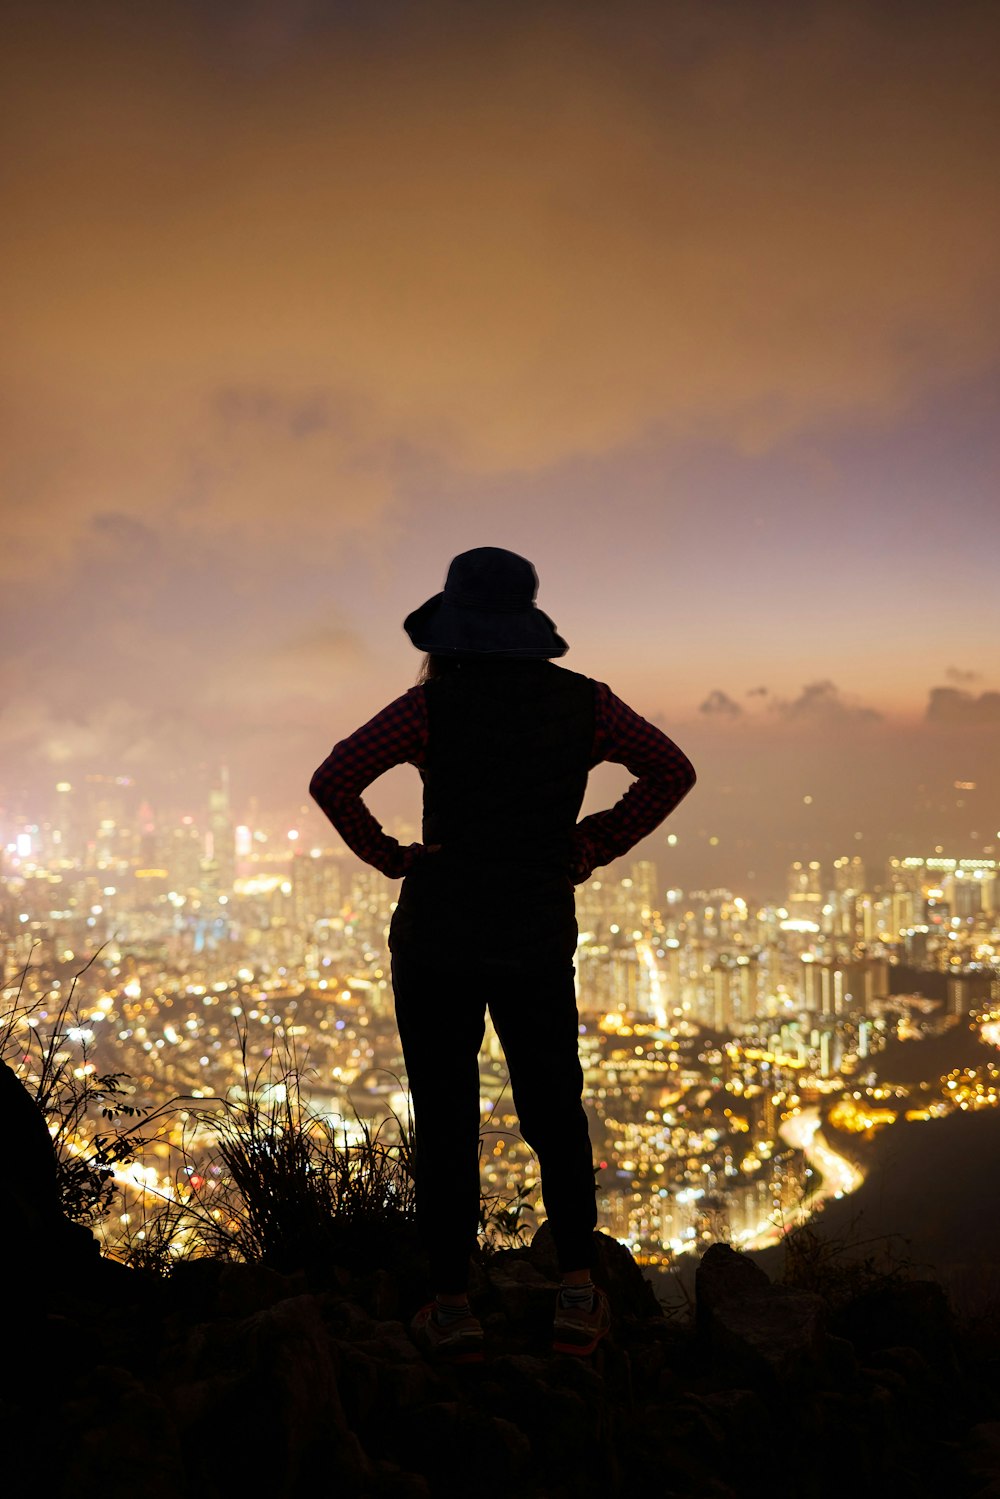 a person standing on a ledge overlooking a city at night